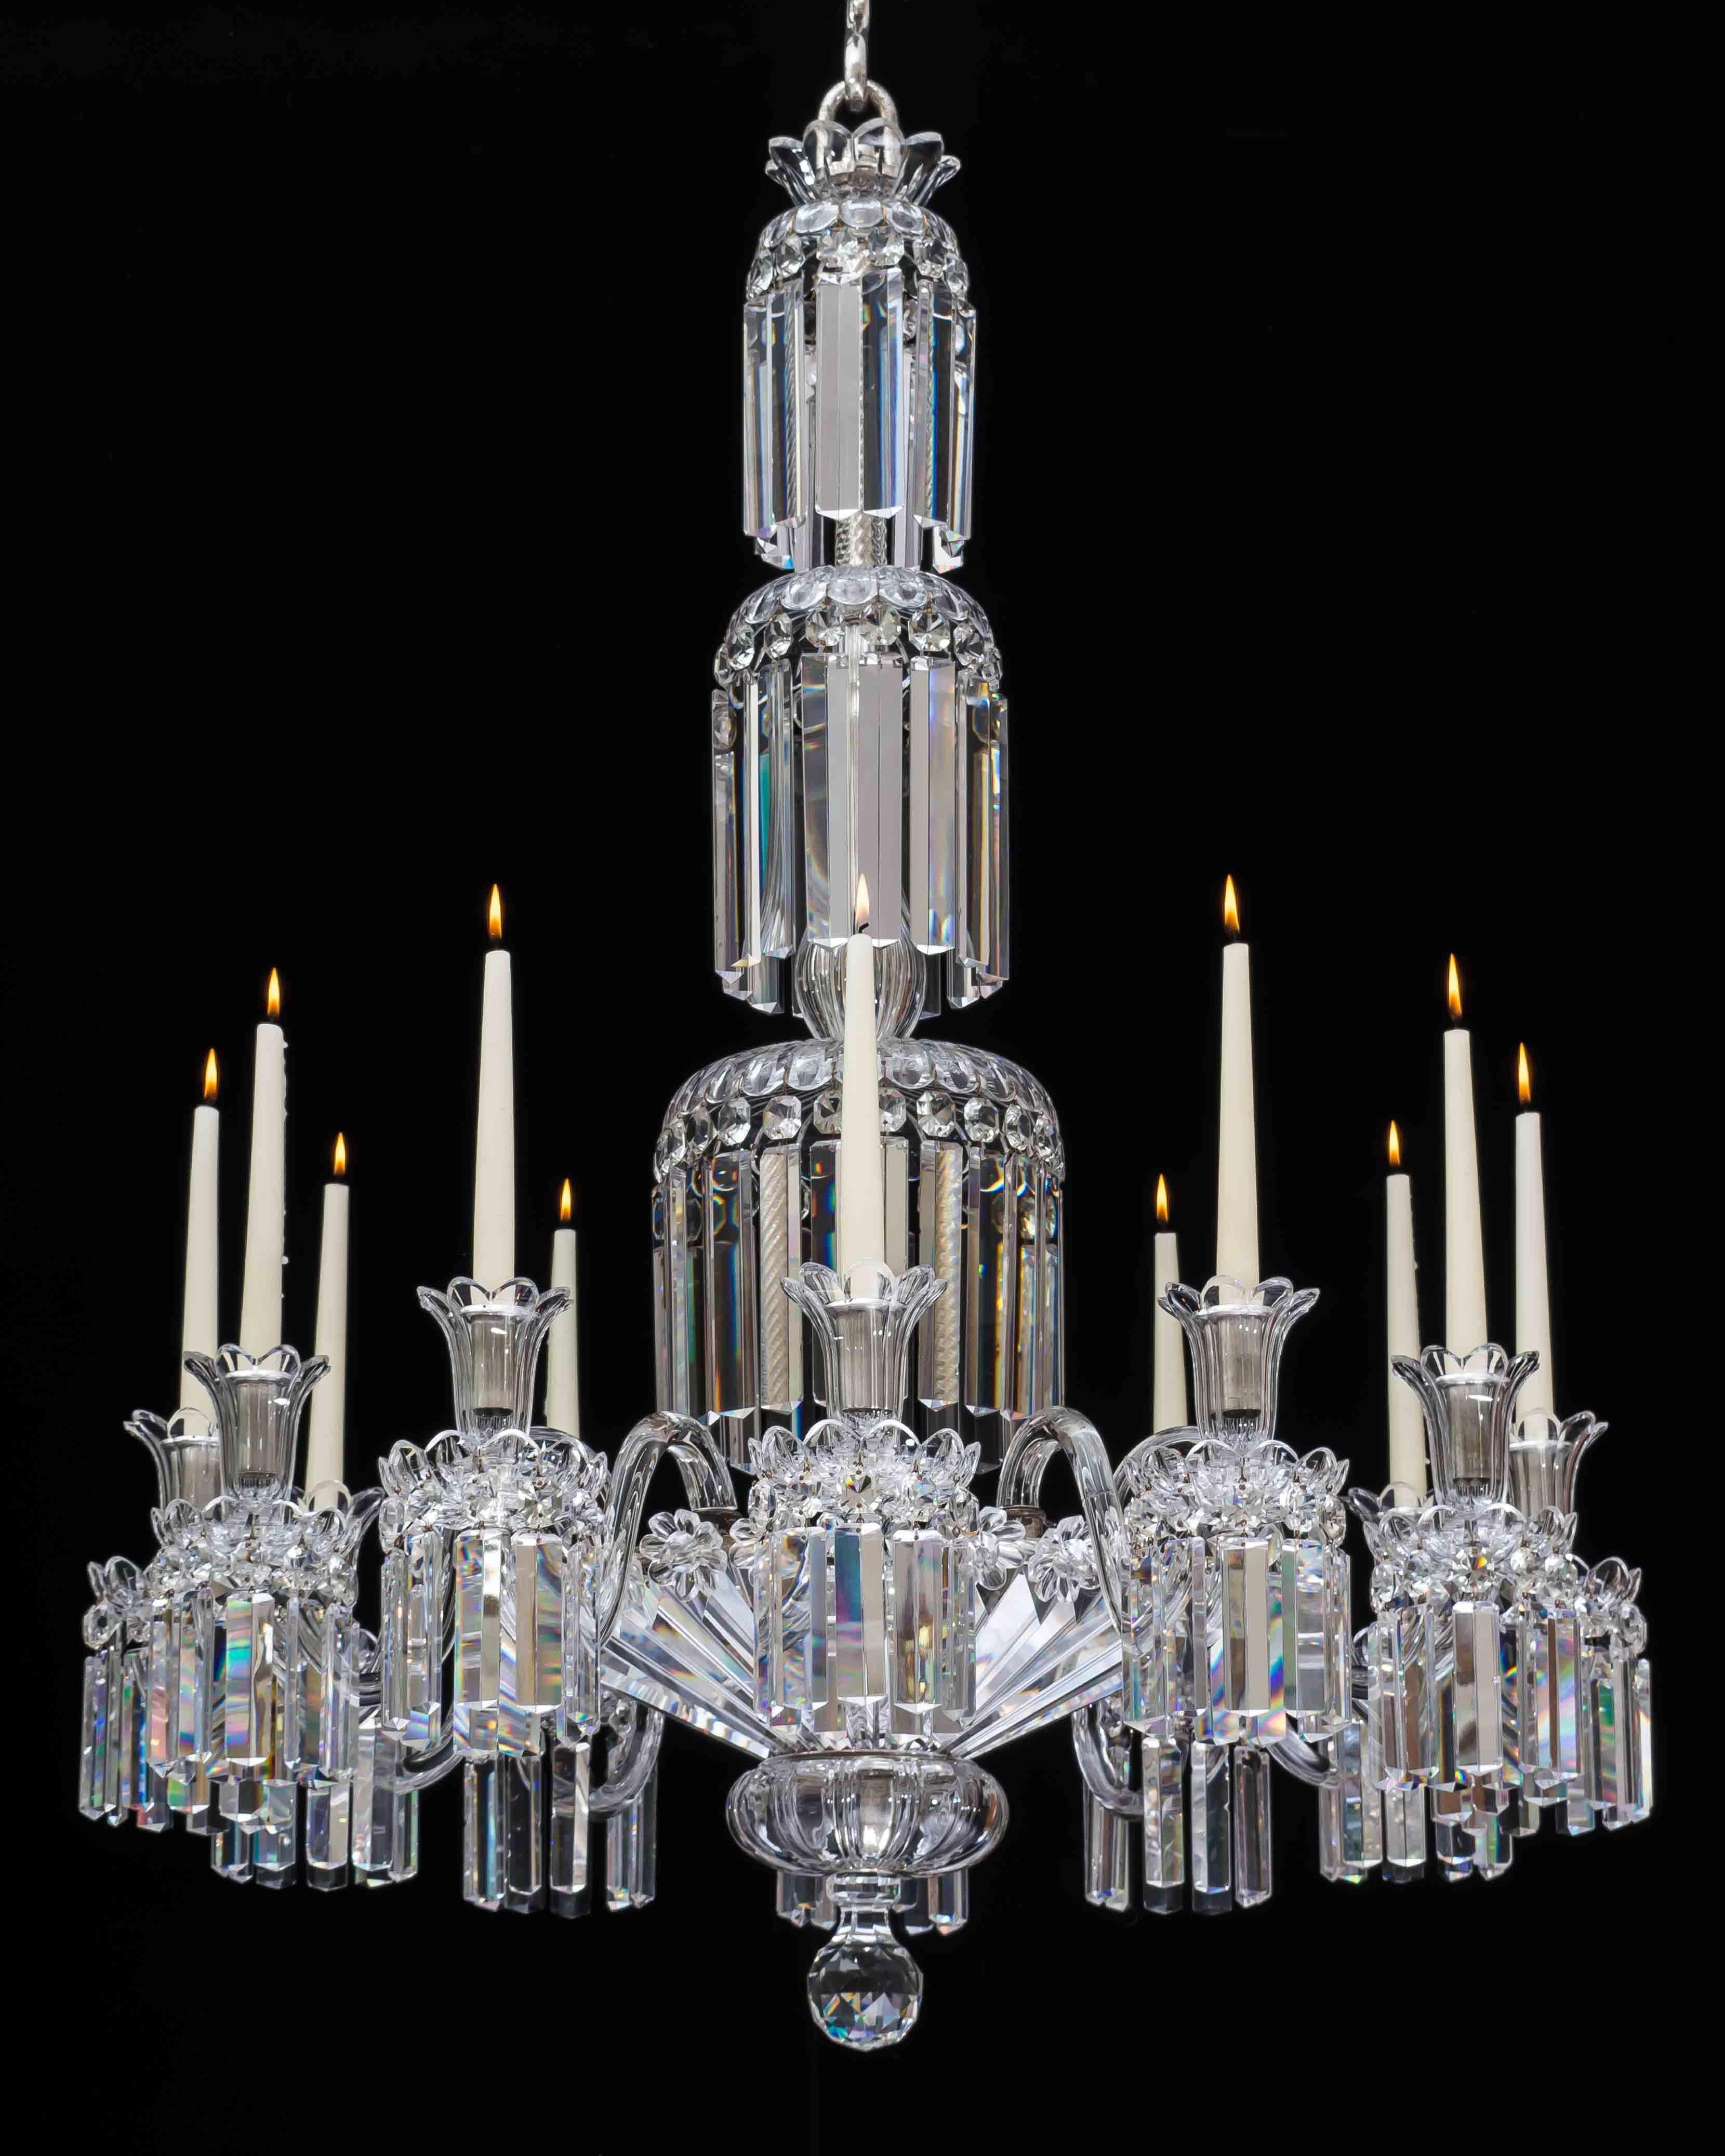 A fine quality William IV silver mounted chandelier the stem with graduated drop hung dishes cascading down to the main frame, issuing twelve plain arms supporting drop hung scalloped edge drip pans and candle nozzles, the frame incased underneath